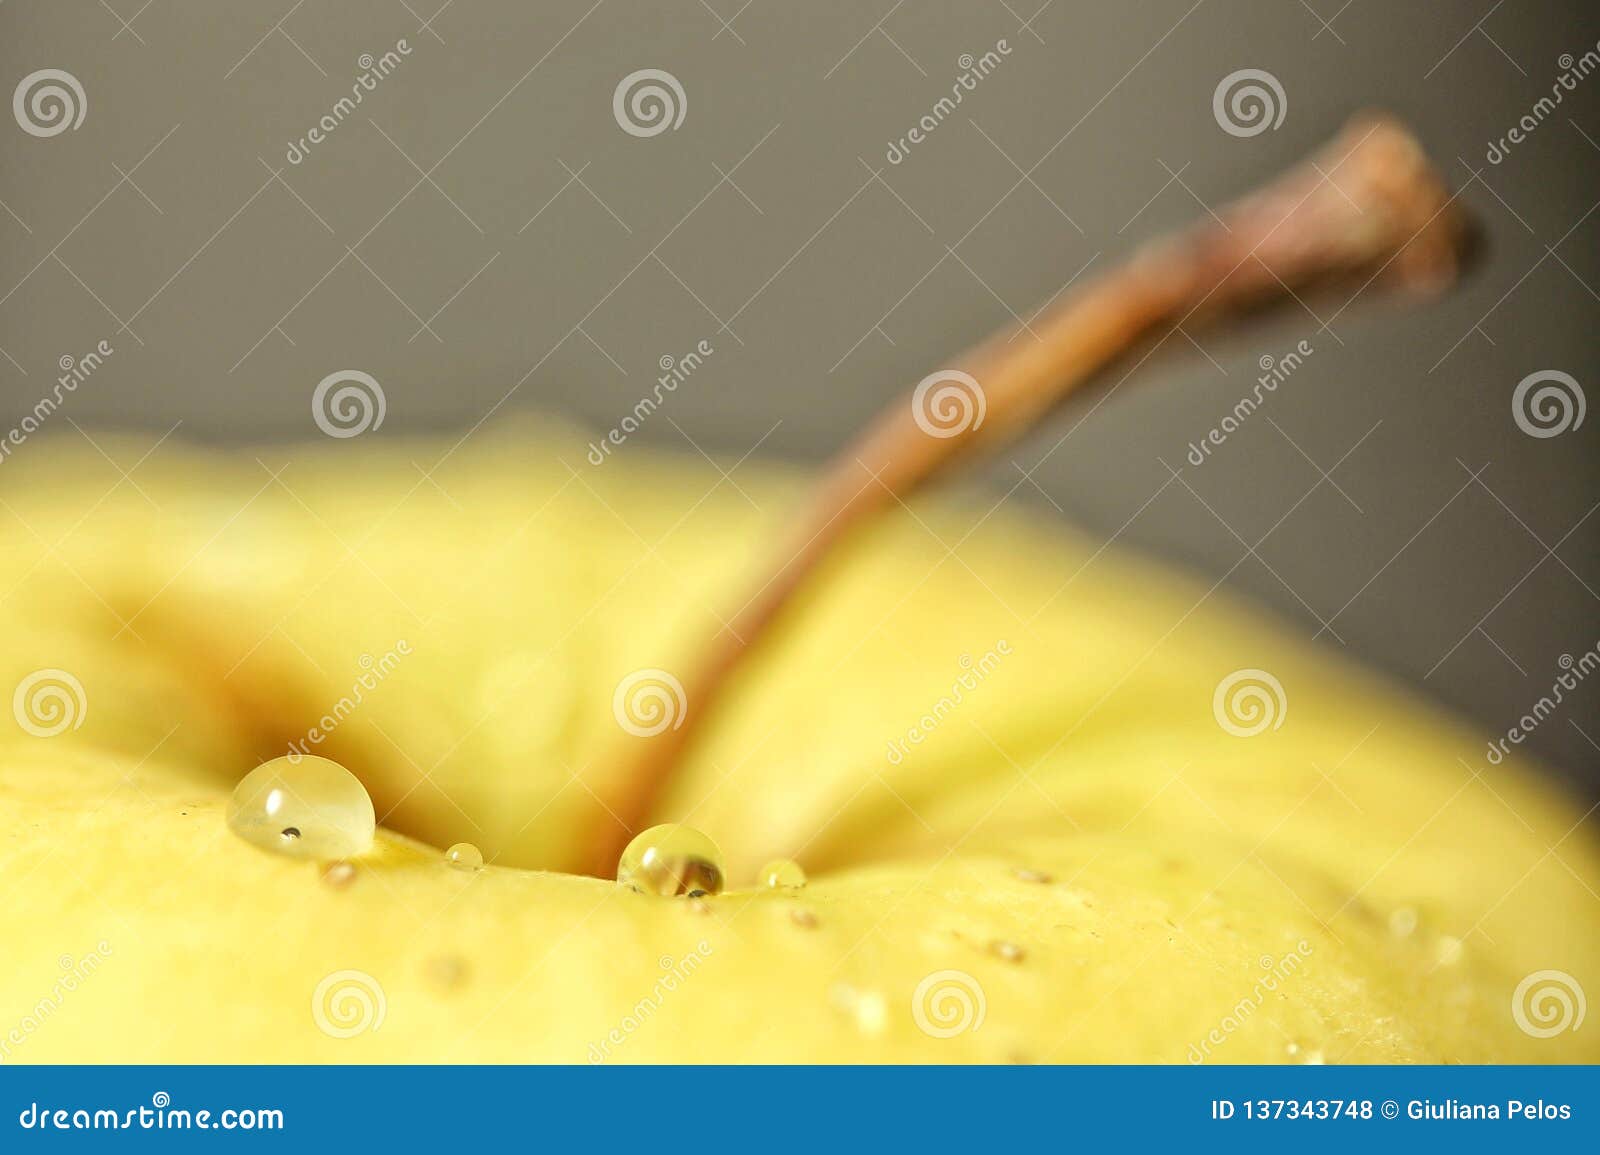 healthy yellow - waterdroplets on a yellow apple